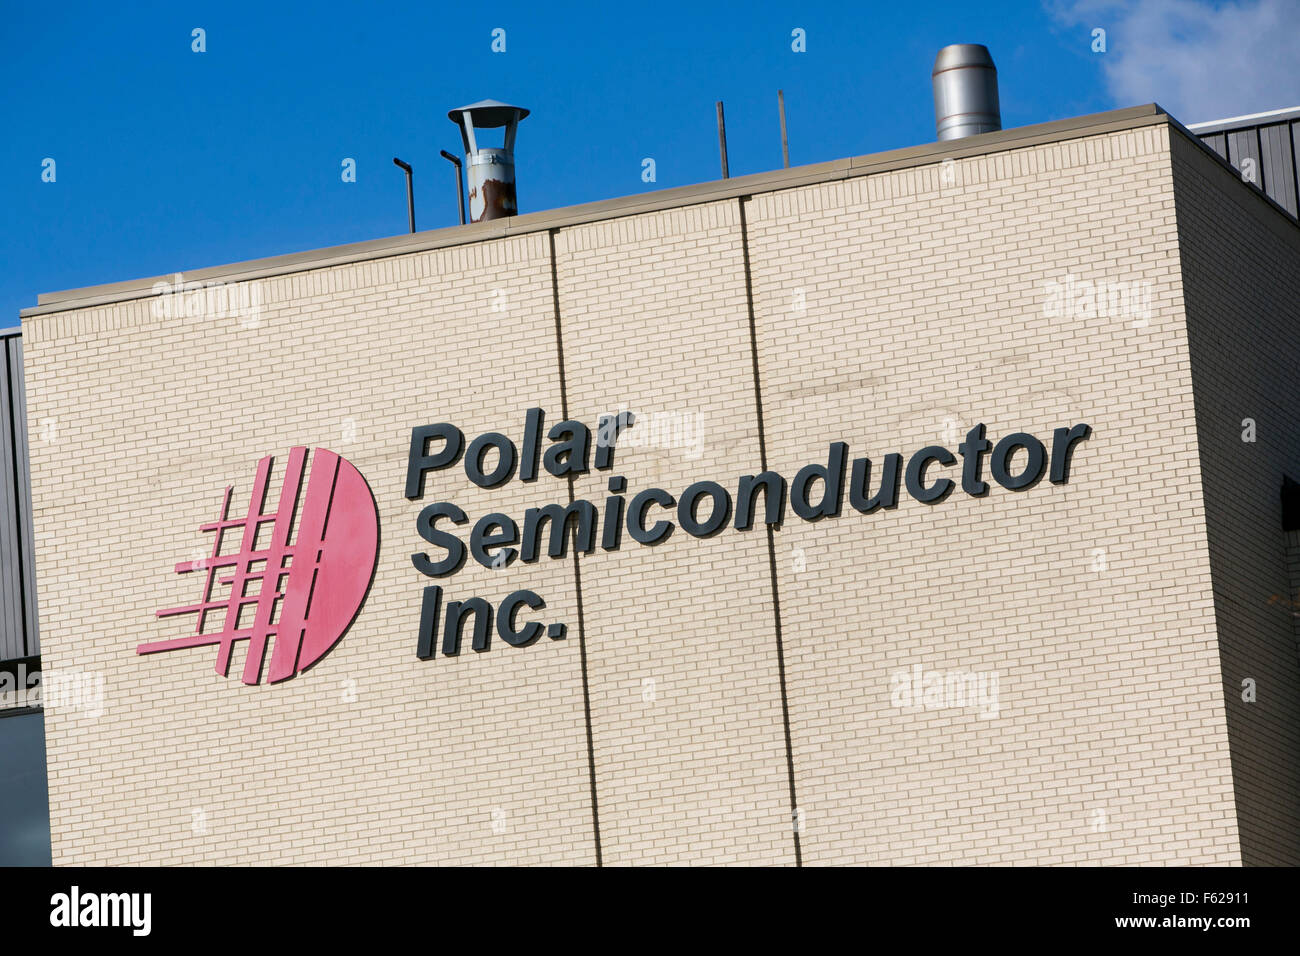 A logo sign outside of a facility occupied by Polar Semiconductor, Inc., in Bloomington, Minnesota on October 24, 2015. Stock Photo